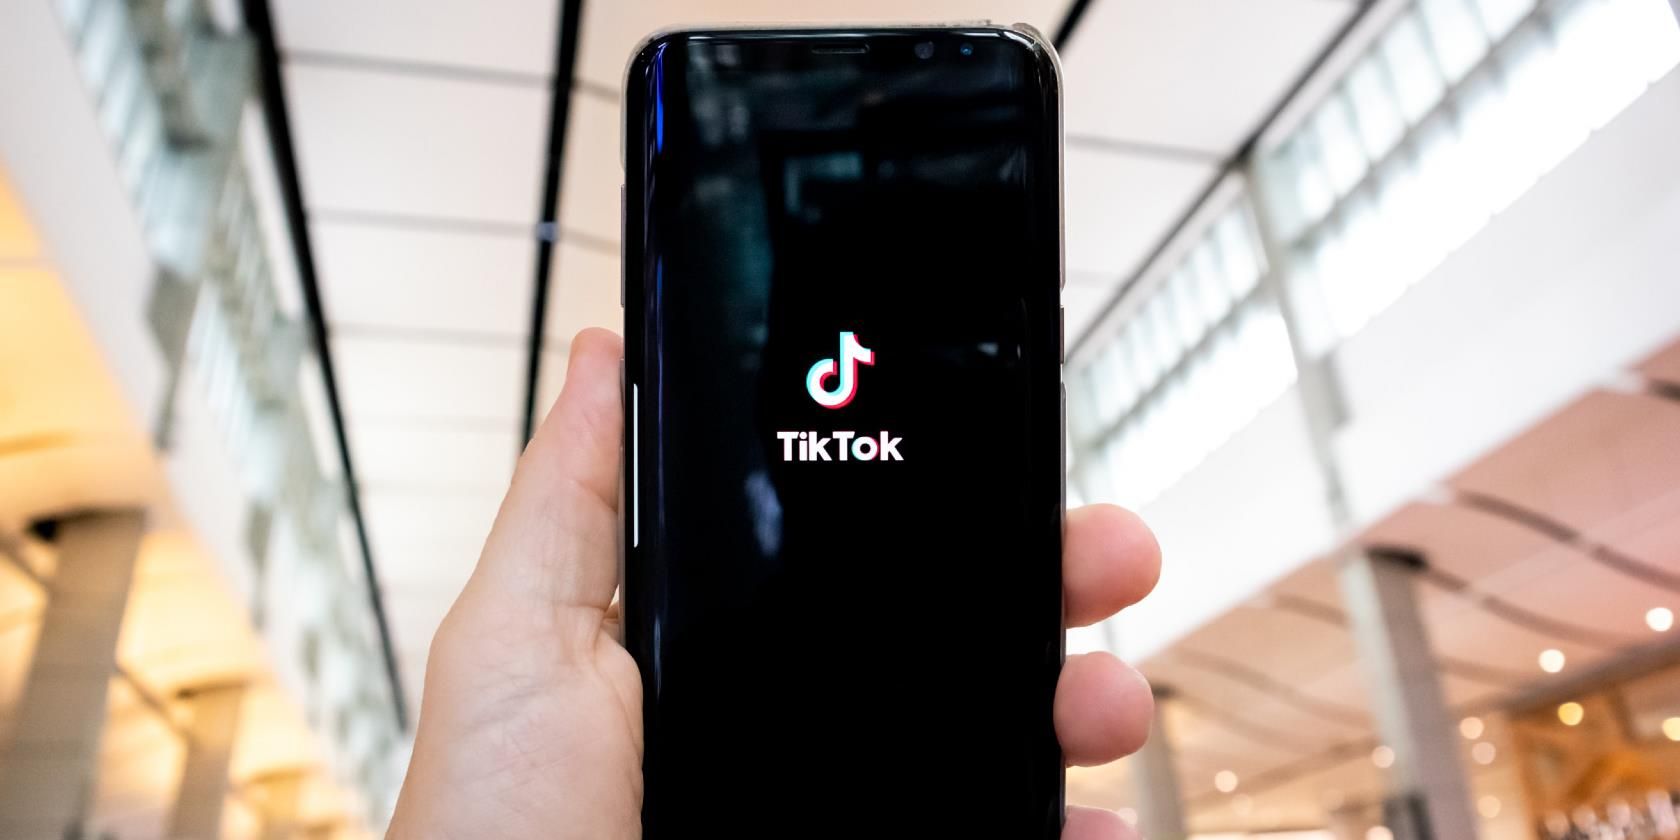 Photo of someone holding their phone with the TikTok app